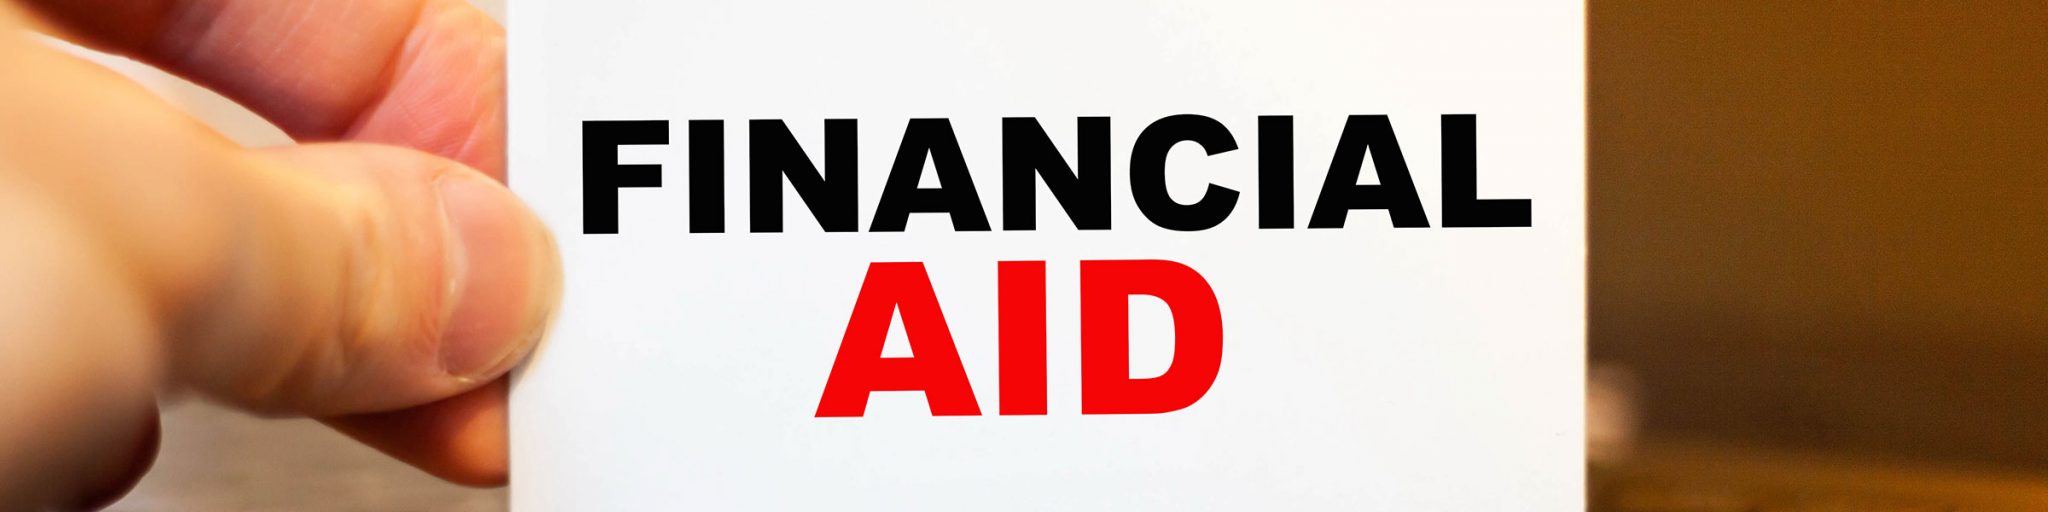 Financial Aid Sign being held by man's hand